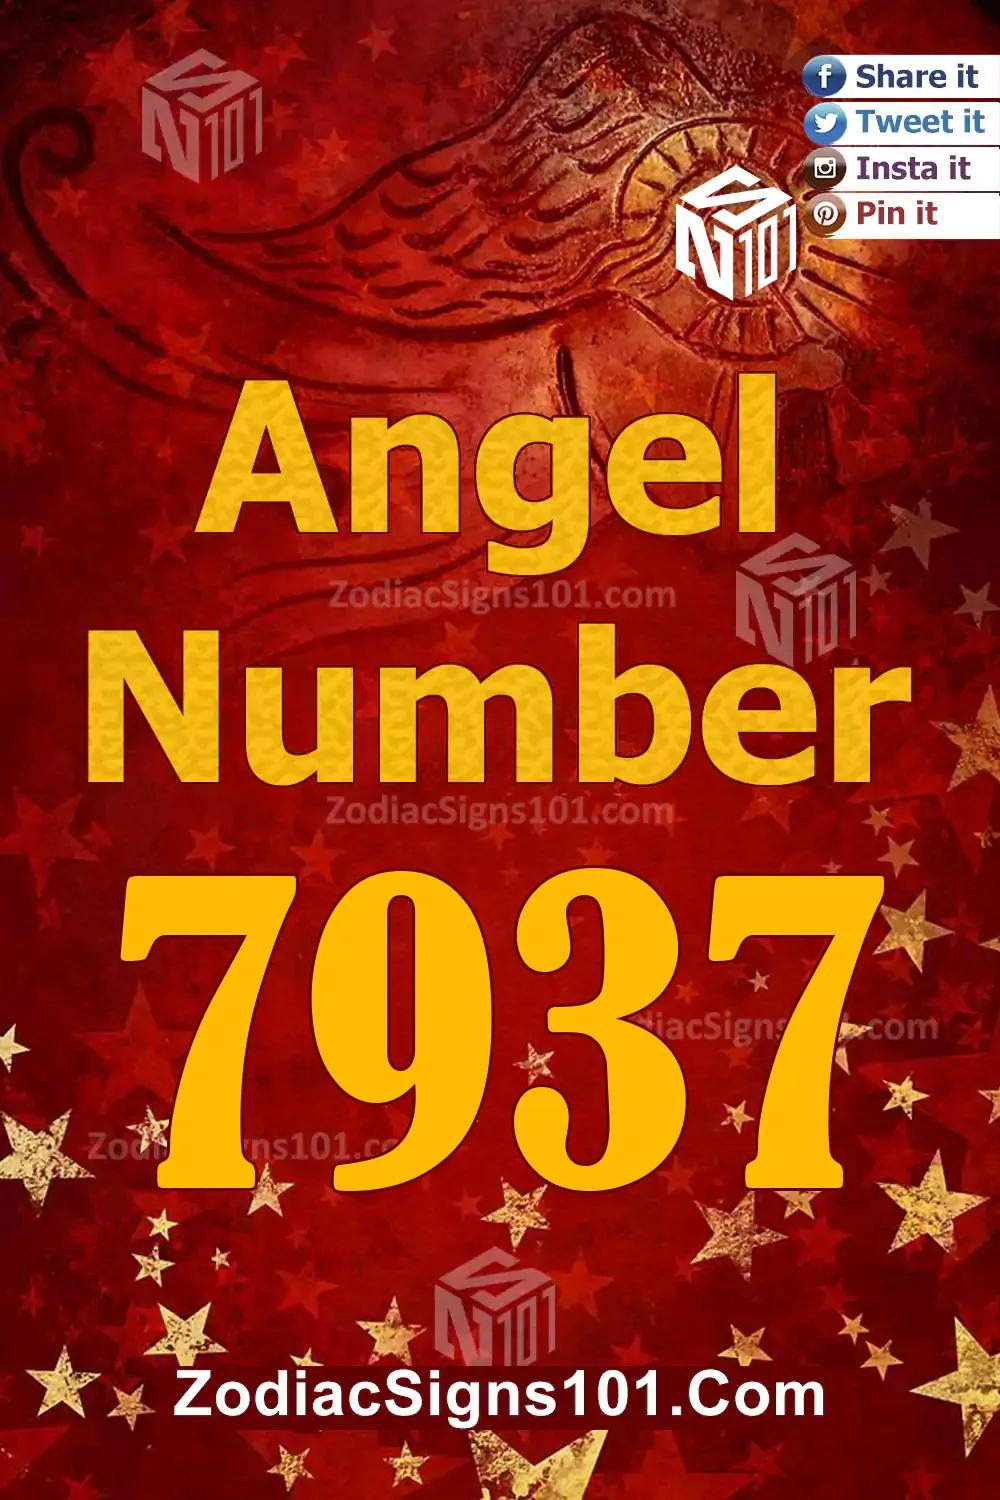 7937 Angel Number Meaning